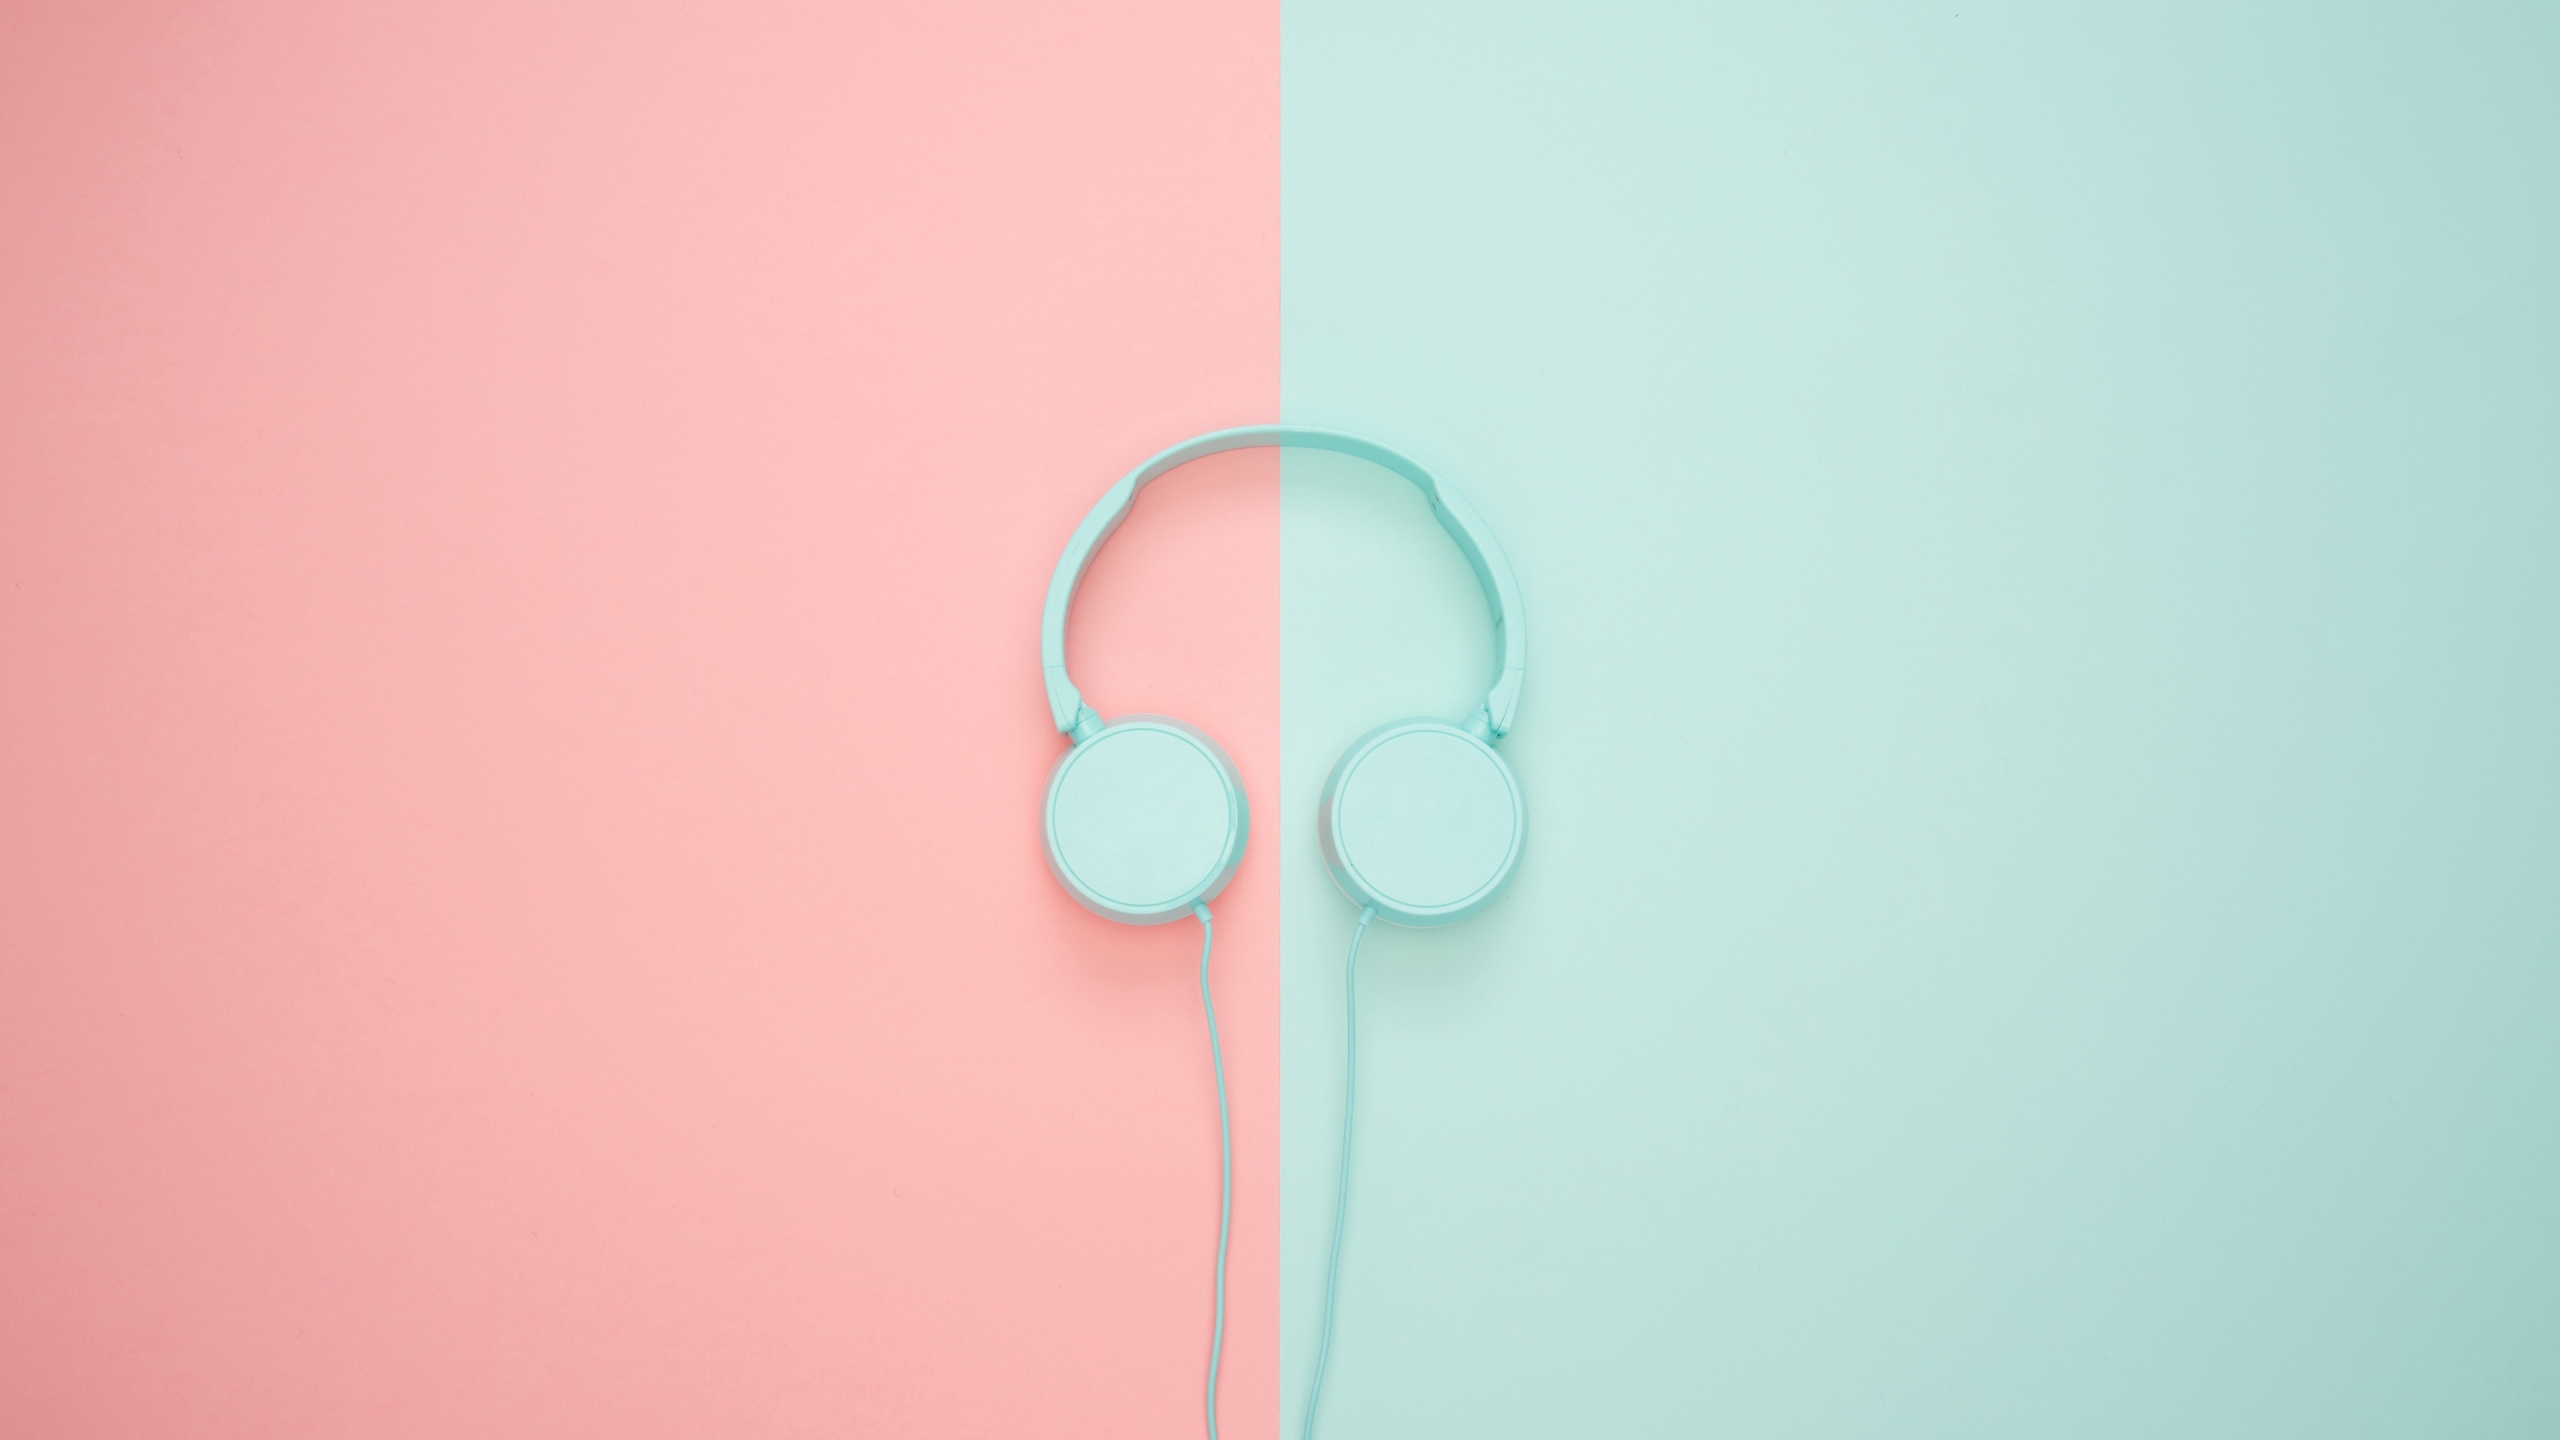 Headphones in pastel pink and blue Wallpaper 4k Ultra HD ID:3844